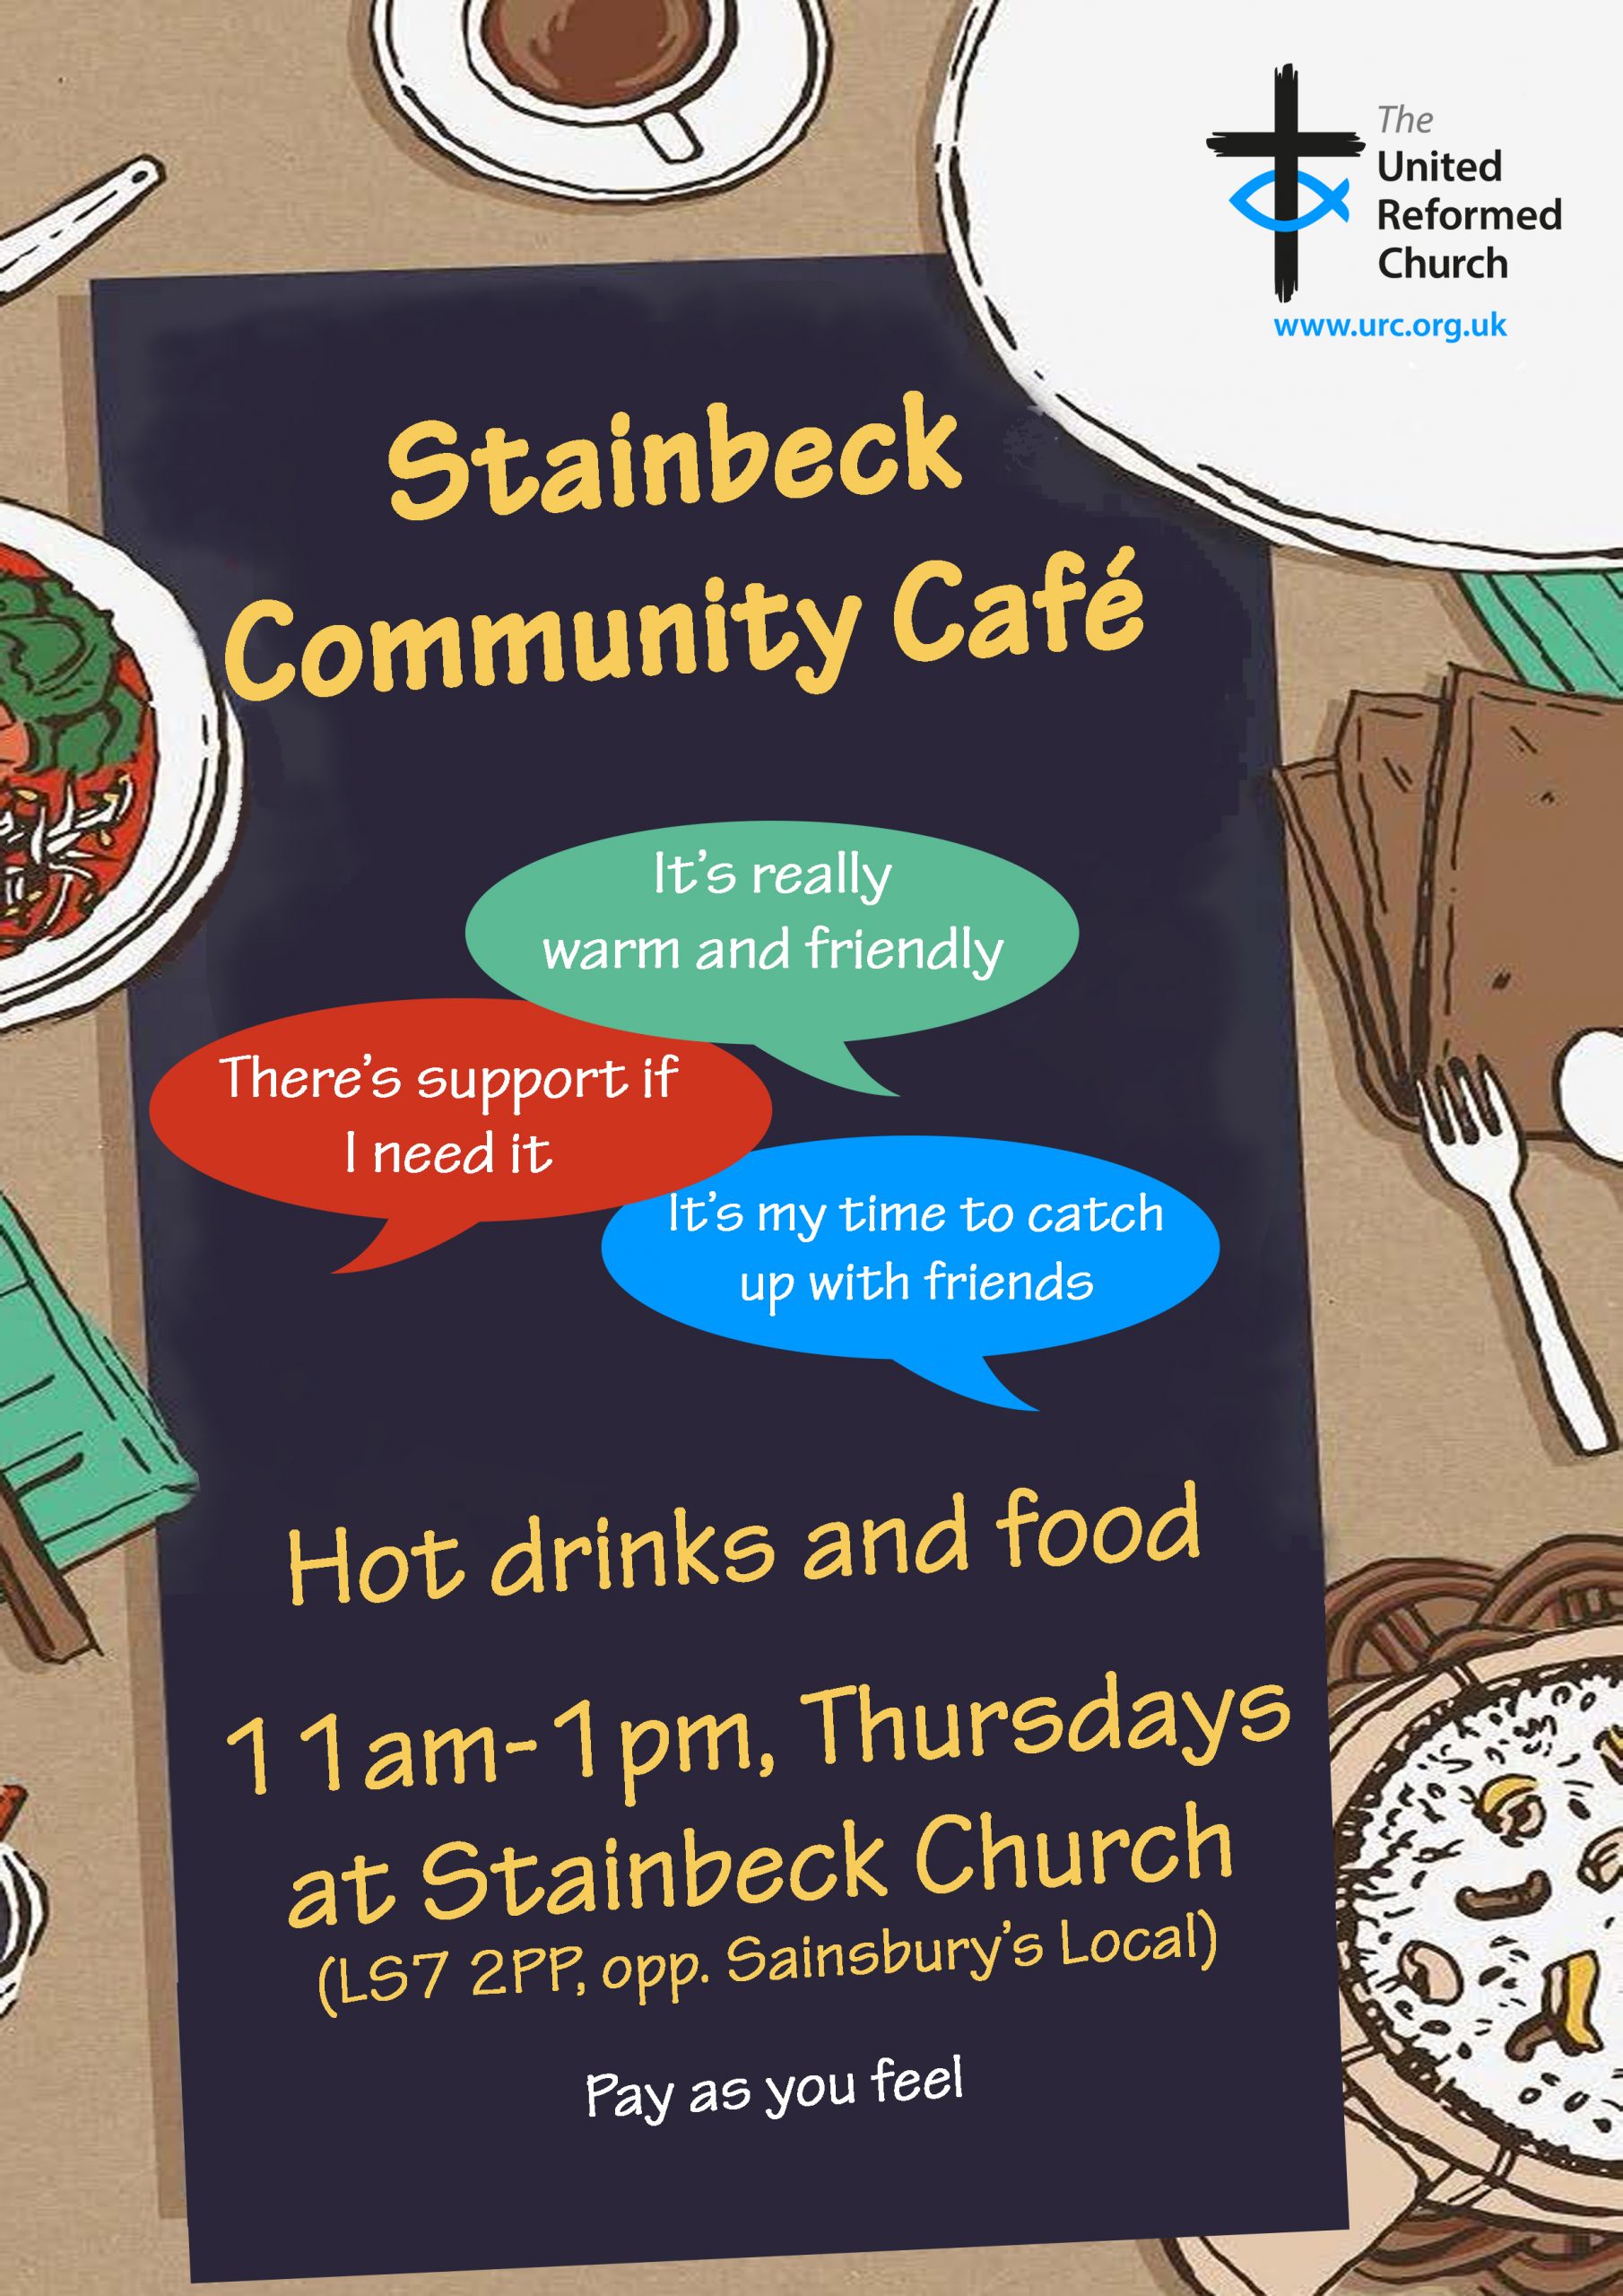 A flier with information about the cafe